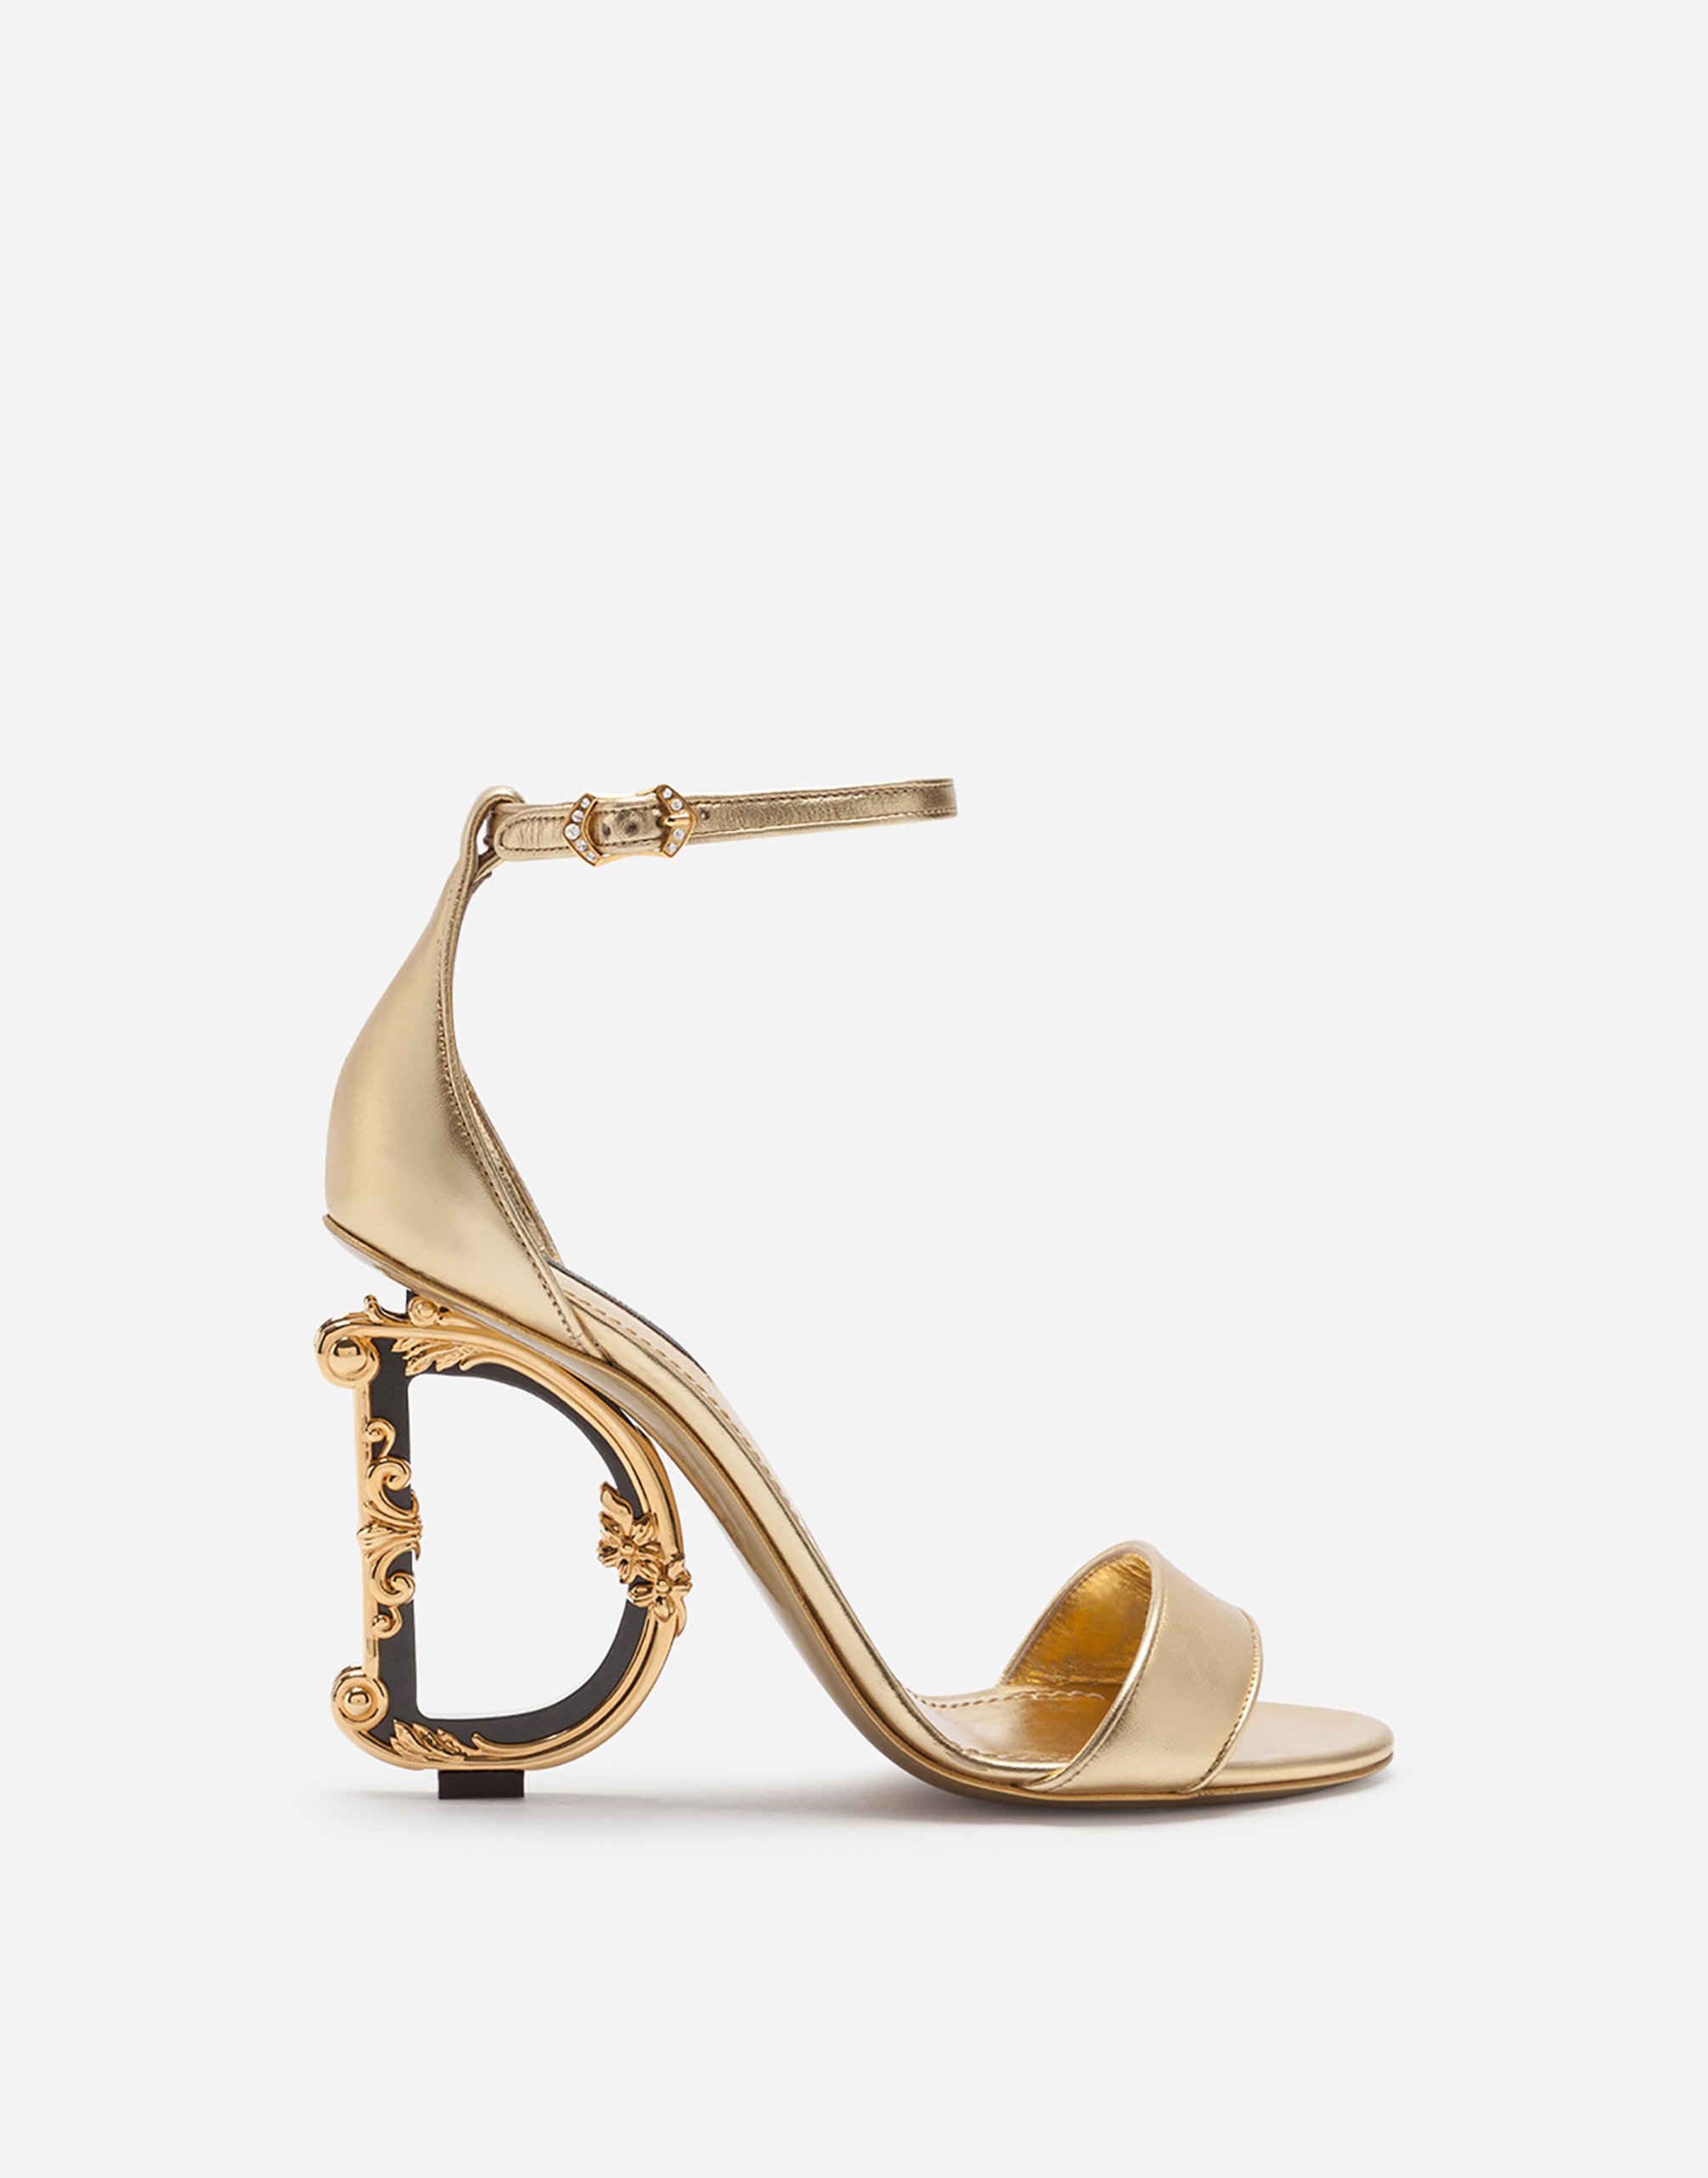 Nappa mordore sandals with baroque DG detail in Gold